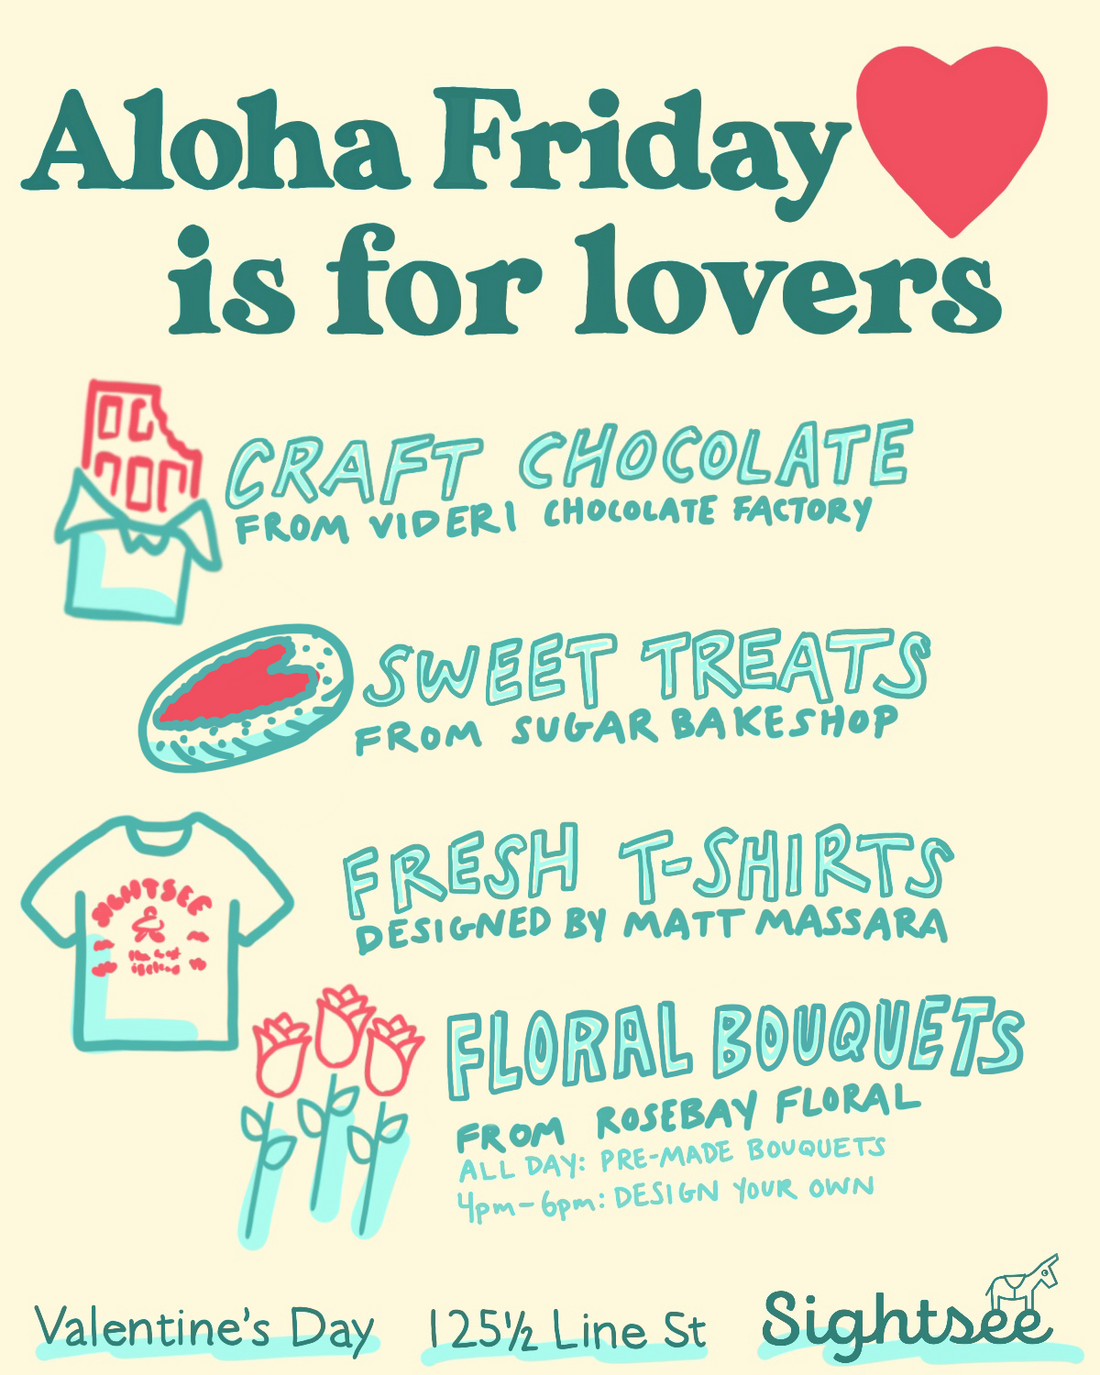 Aloha Friday is for Lovers